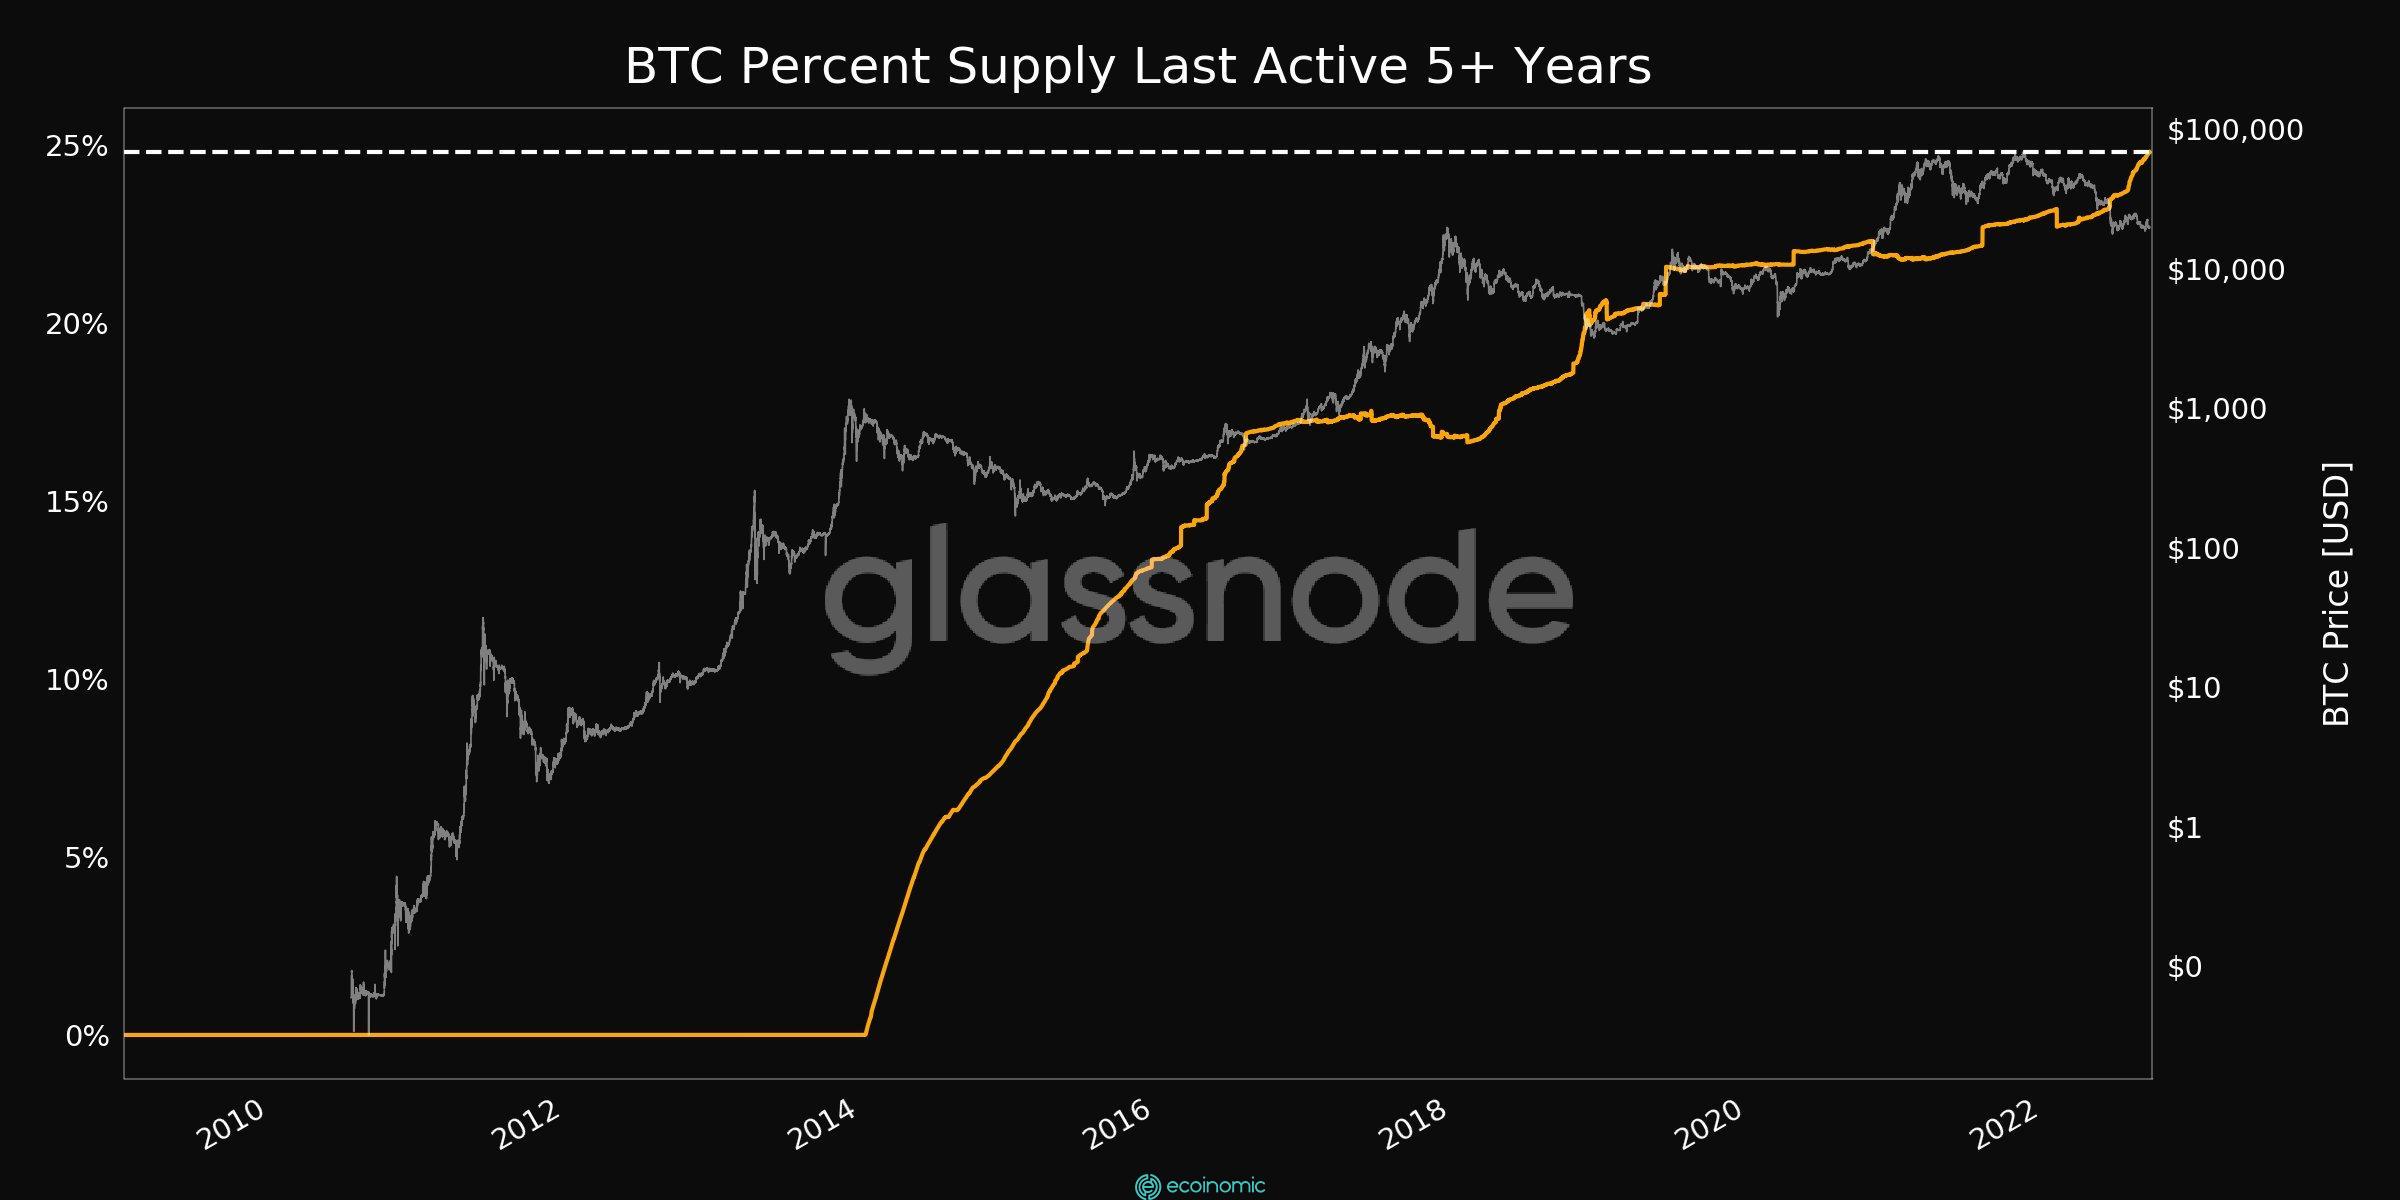 Bitcoin % supply last active 5+ years ago chart. Source: Glassnode/ Twitter